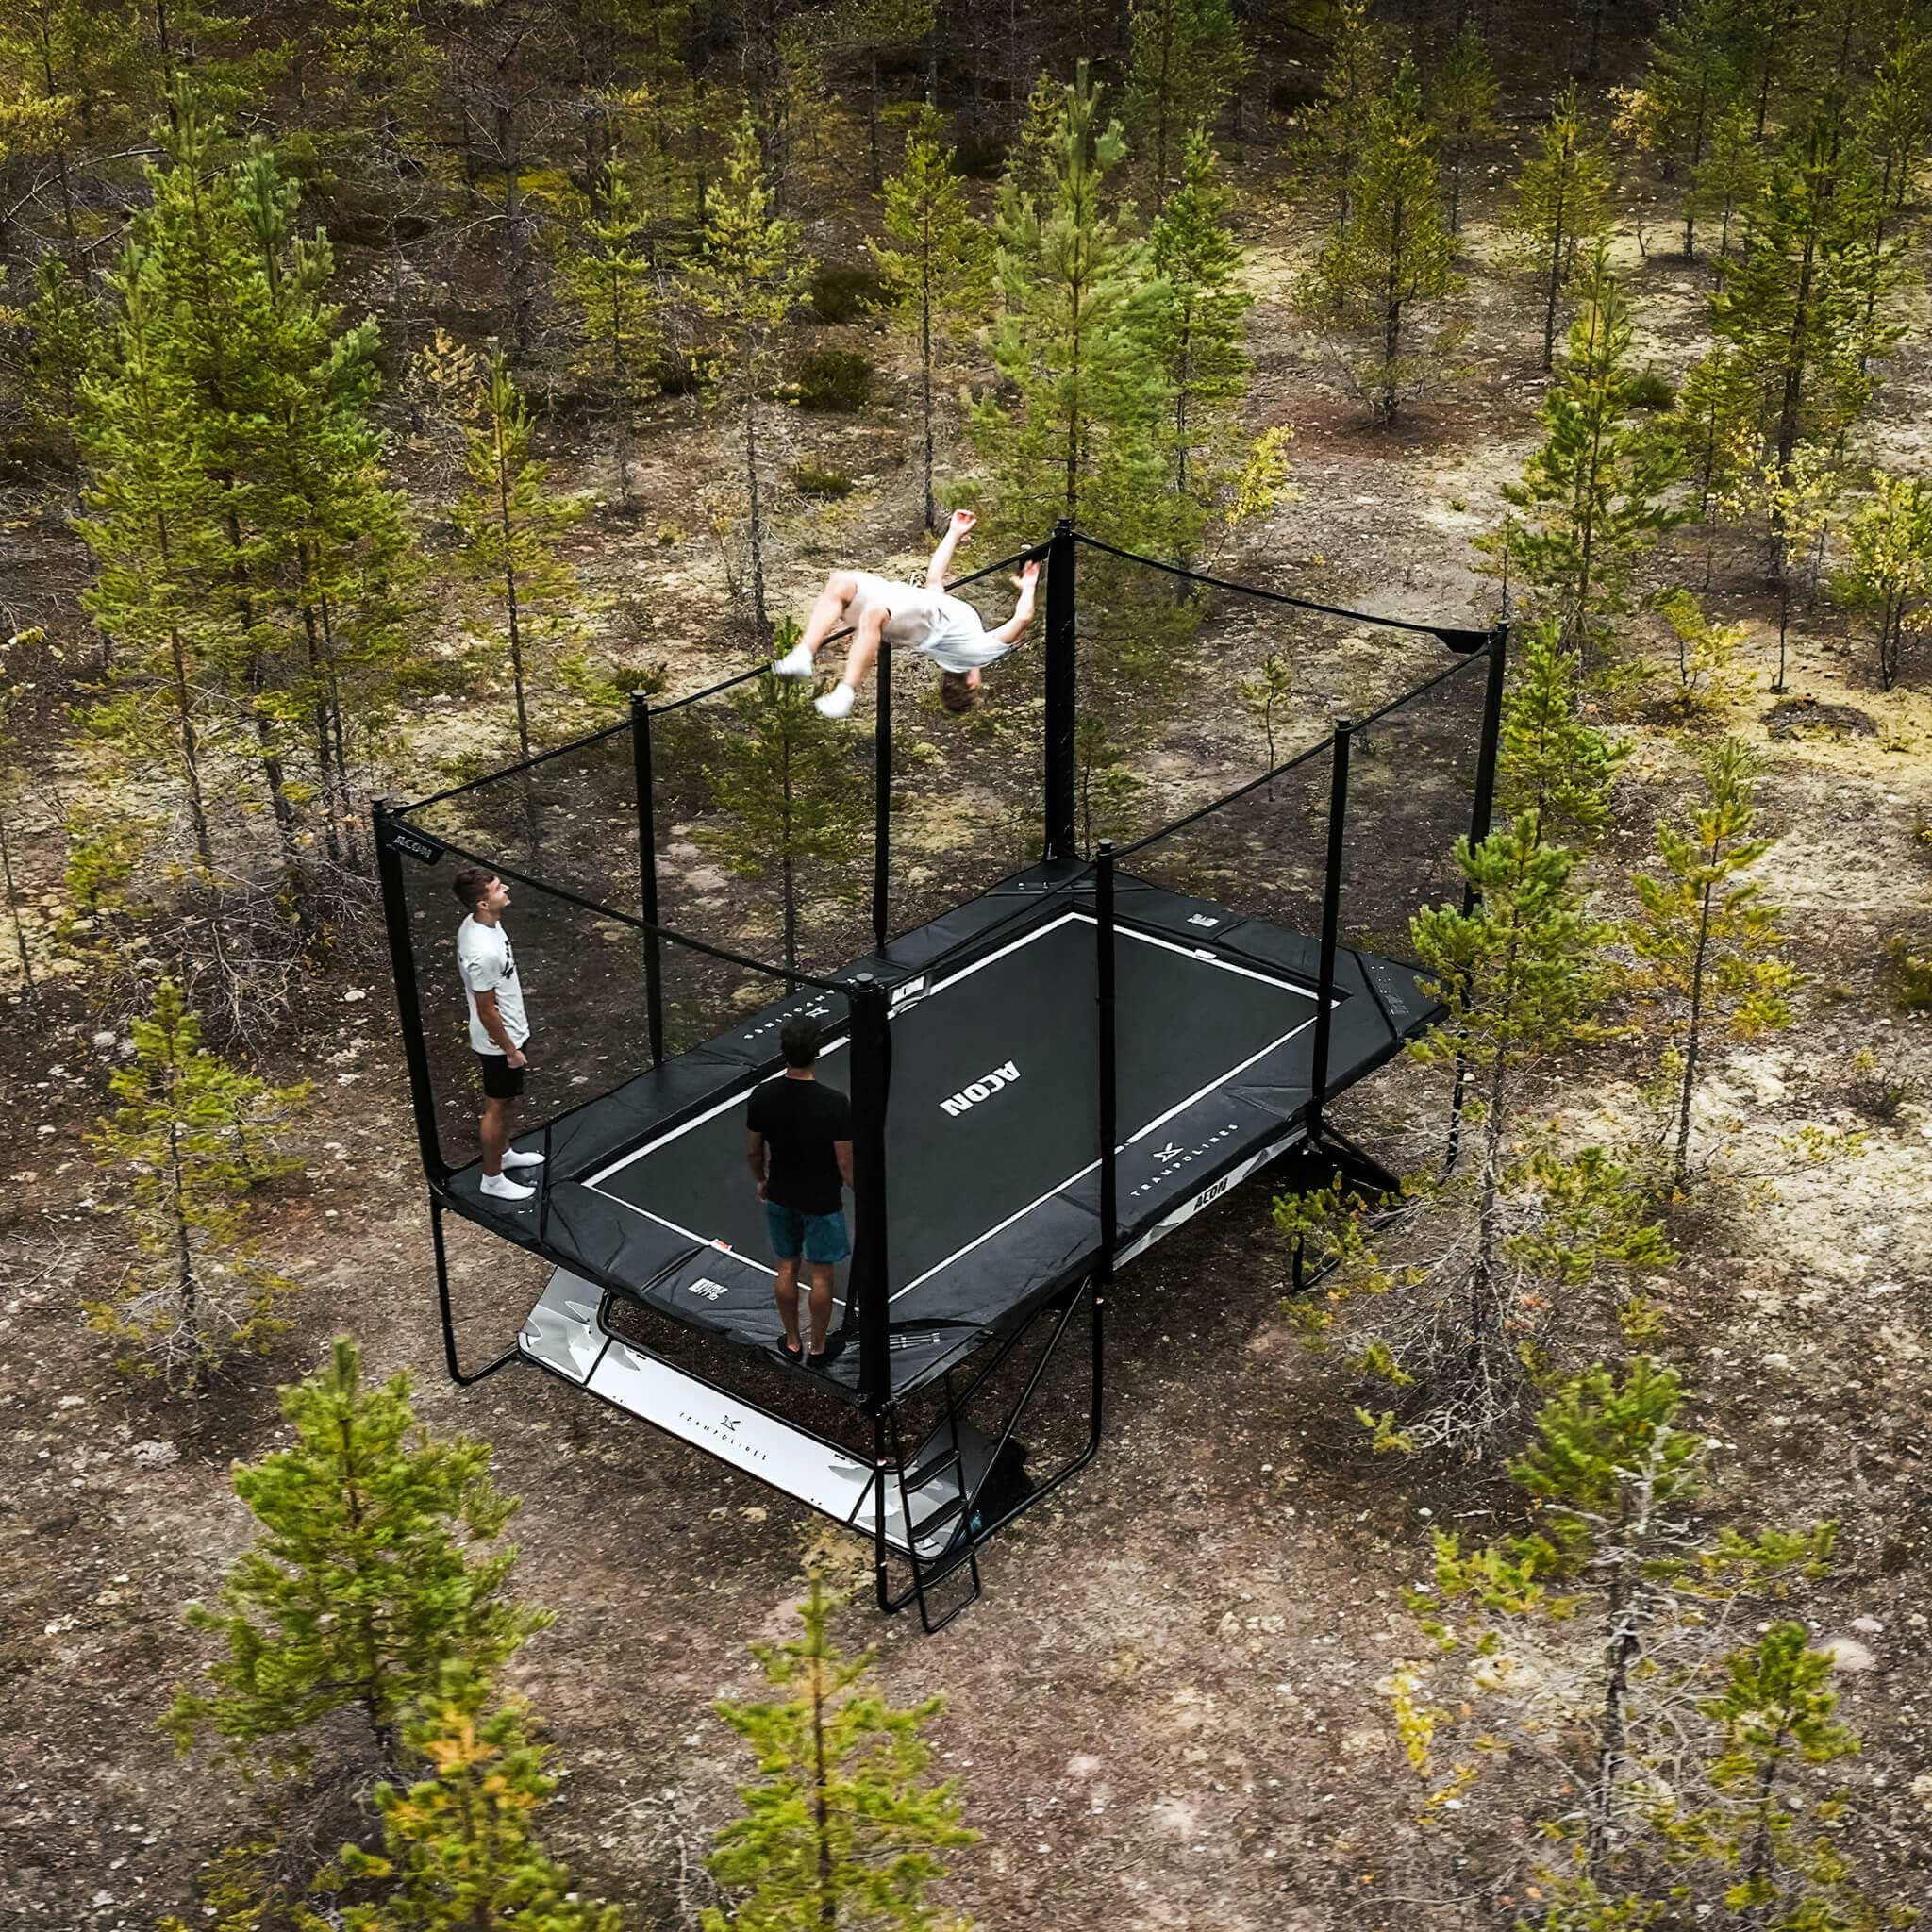 Three trampoline tricksters on an Acon X Trampoline in a Nordic pine forest.